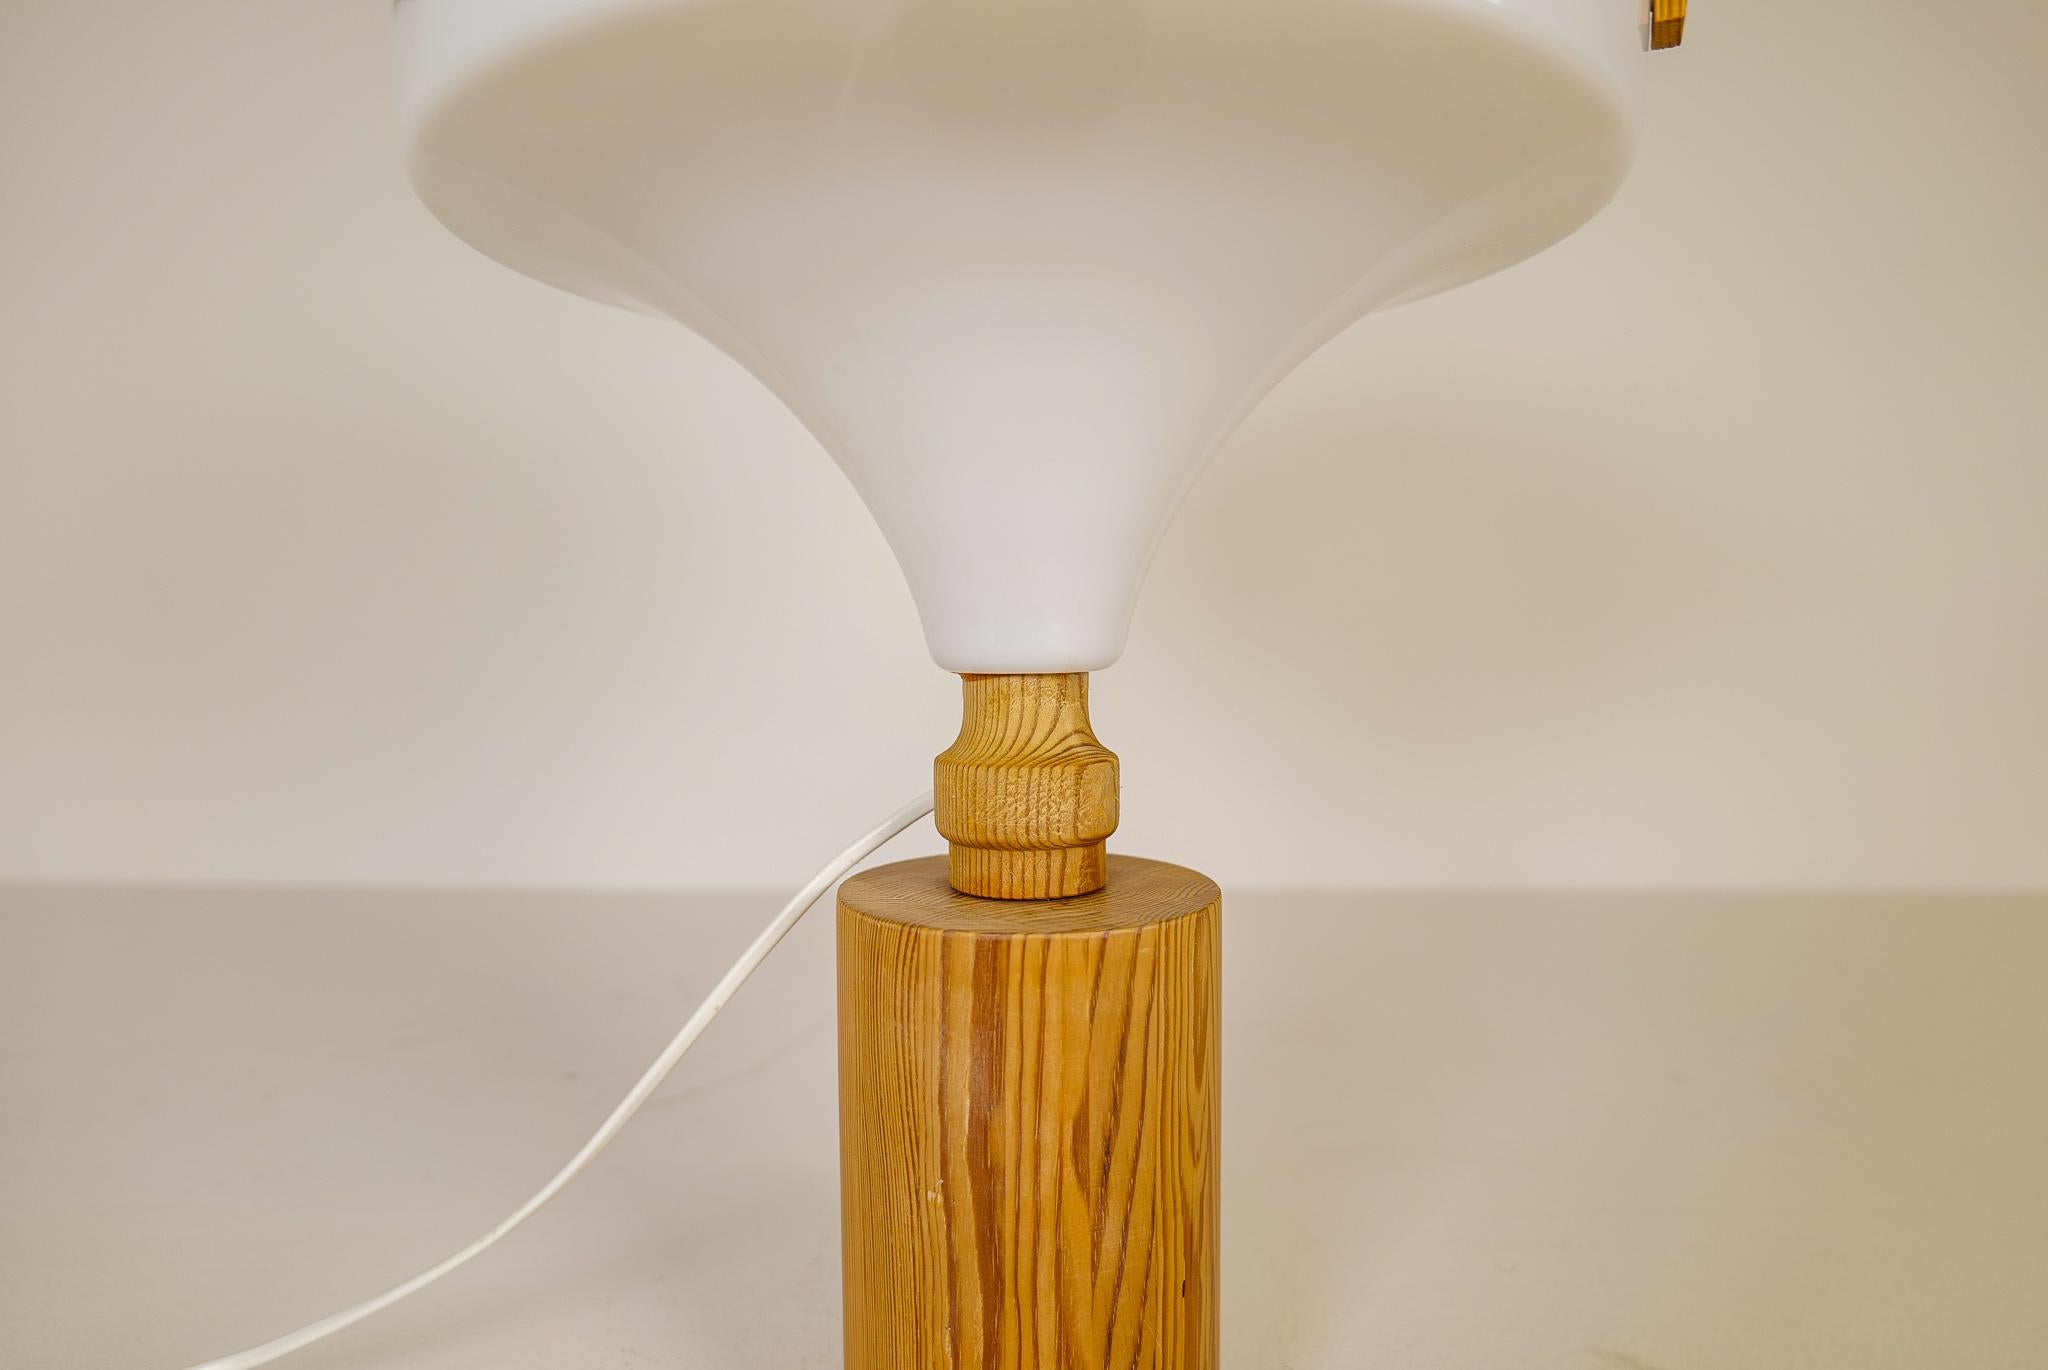 Late 20th Century Mid-Century Modern Table Lamp in Pine and Acrylic, Sweden, 1970s